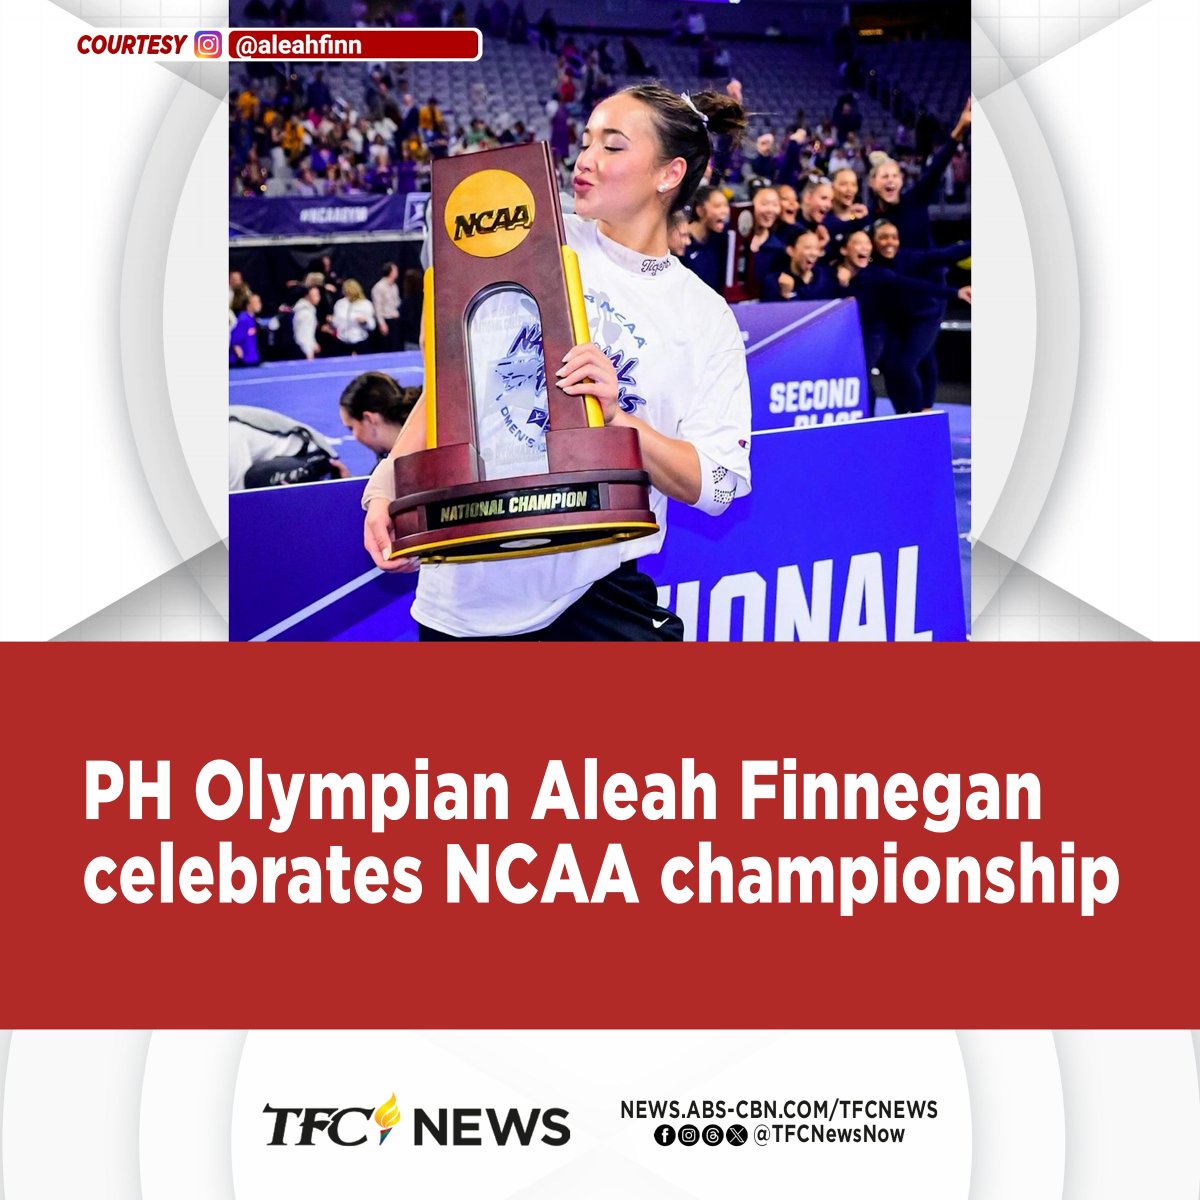 FilAm gymnast Aleah Finnegan, fresh from qualifying for the 2024 Olympics, marks another milestone as she and the Louisiana State University women's gymnastics team grab their first NCAA championship. @StevieAngeles reports. #TFCNews WATCH: youtu.be/sKzcb4LfAFw